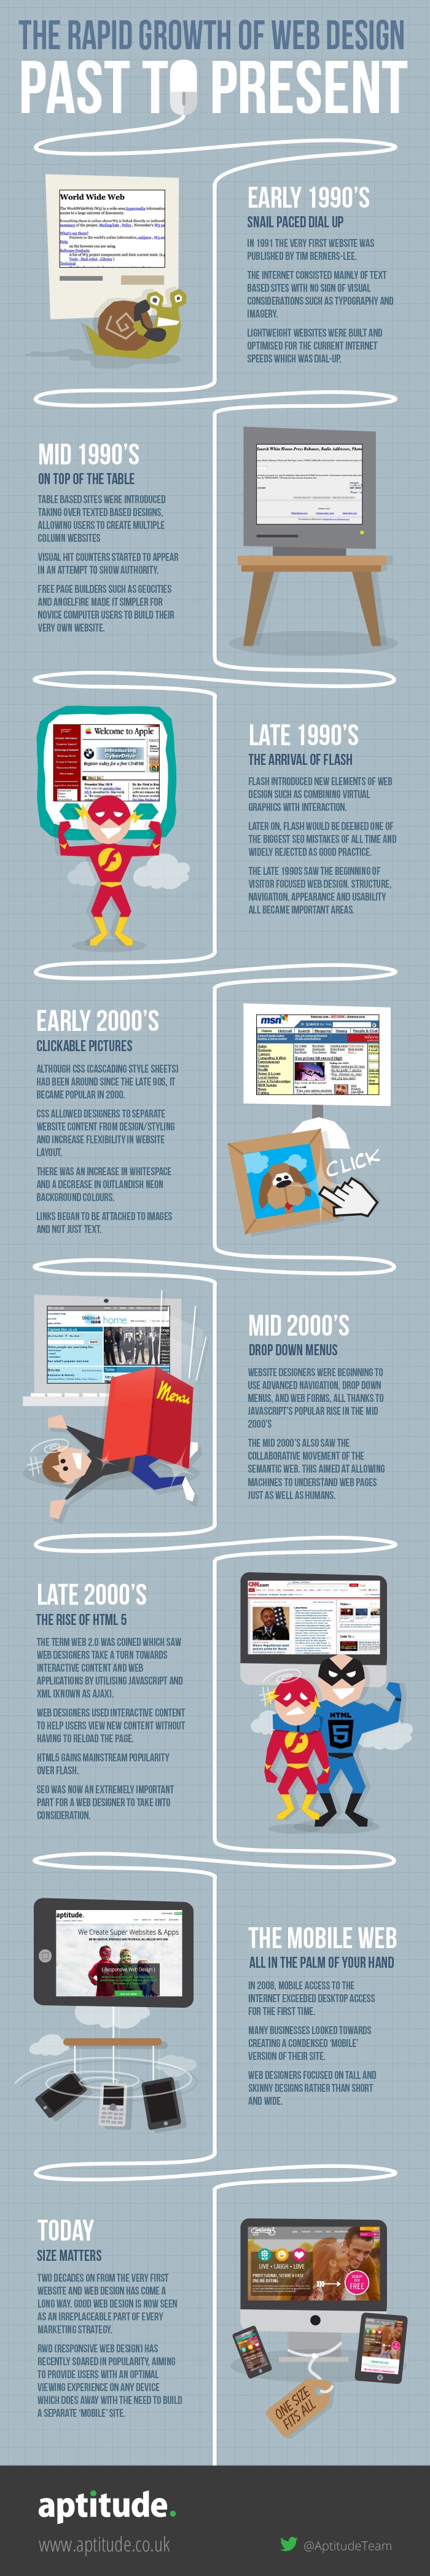 The Rapid Growth of Web Design: Past to Present (Infographic)